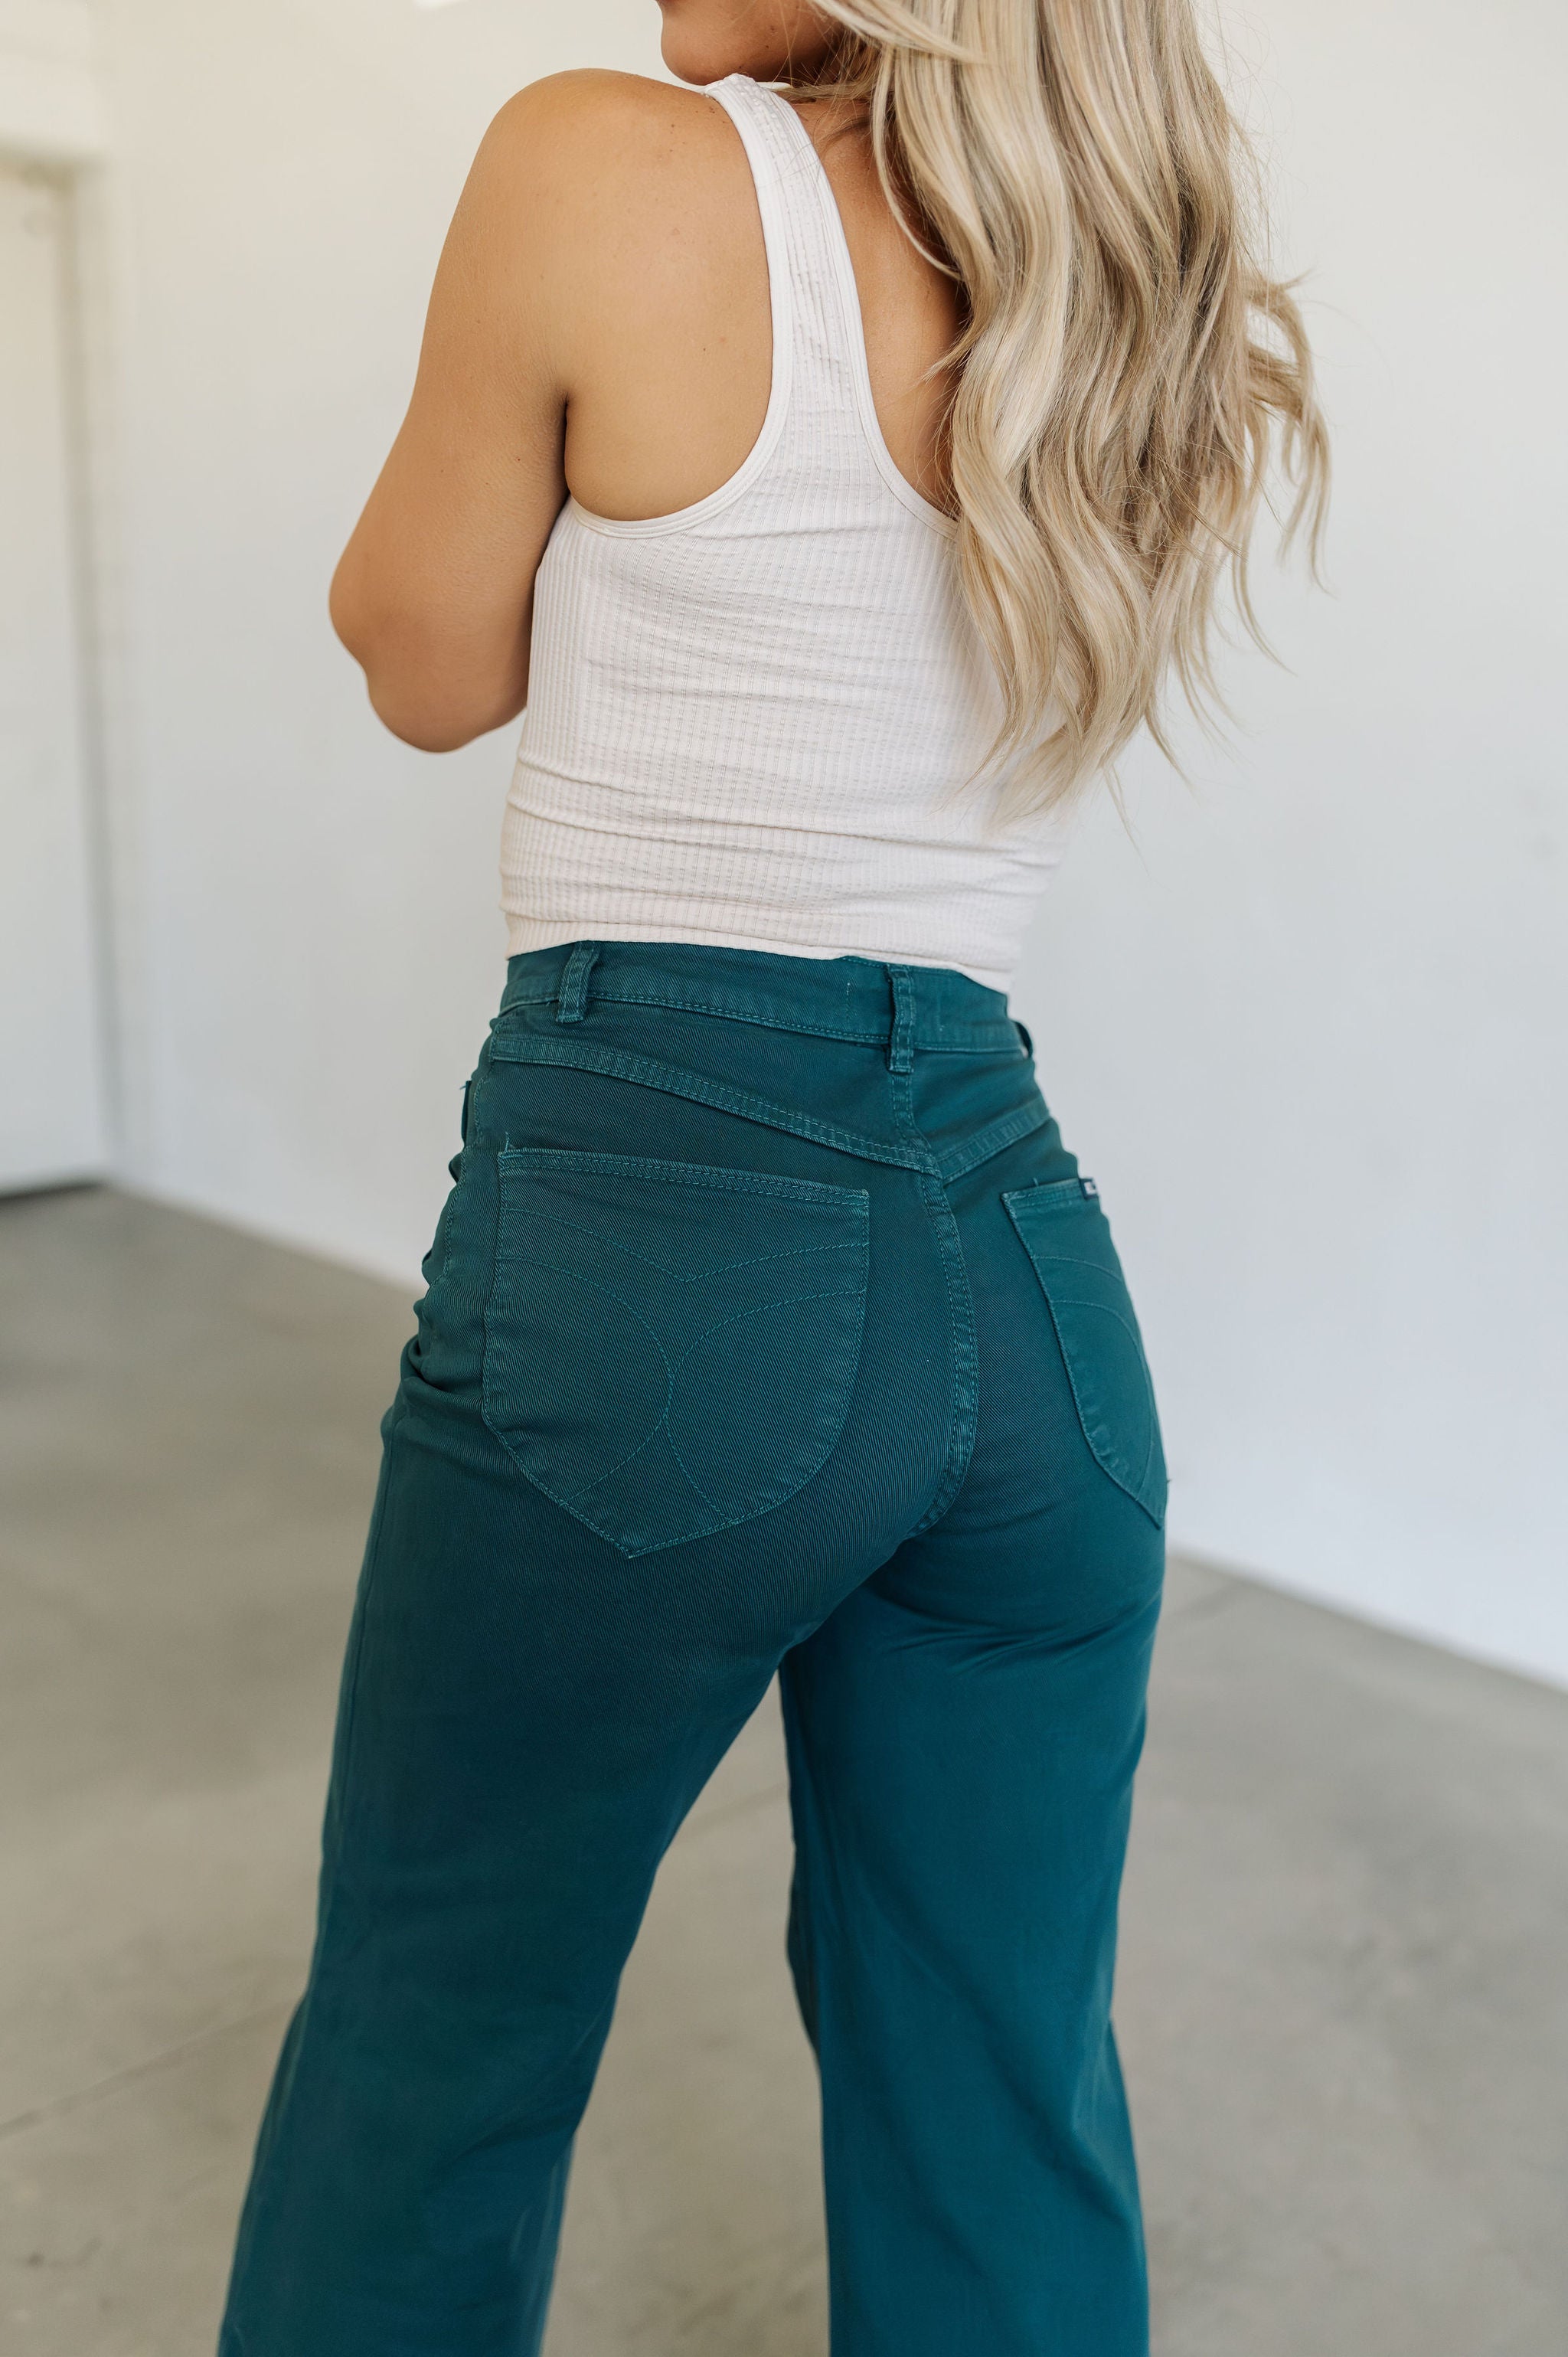 Rear view of Sailor Jeans in forest with angled rear pockets.